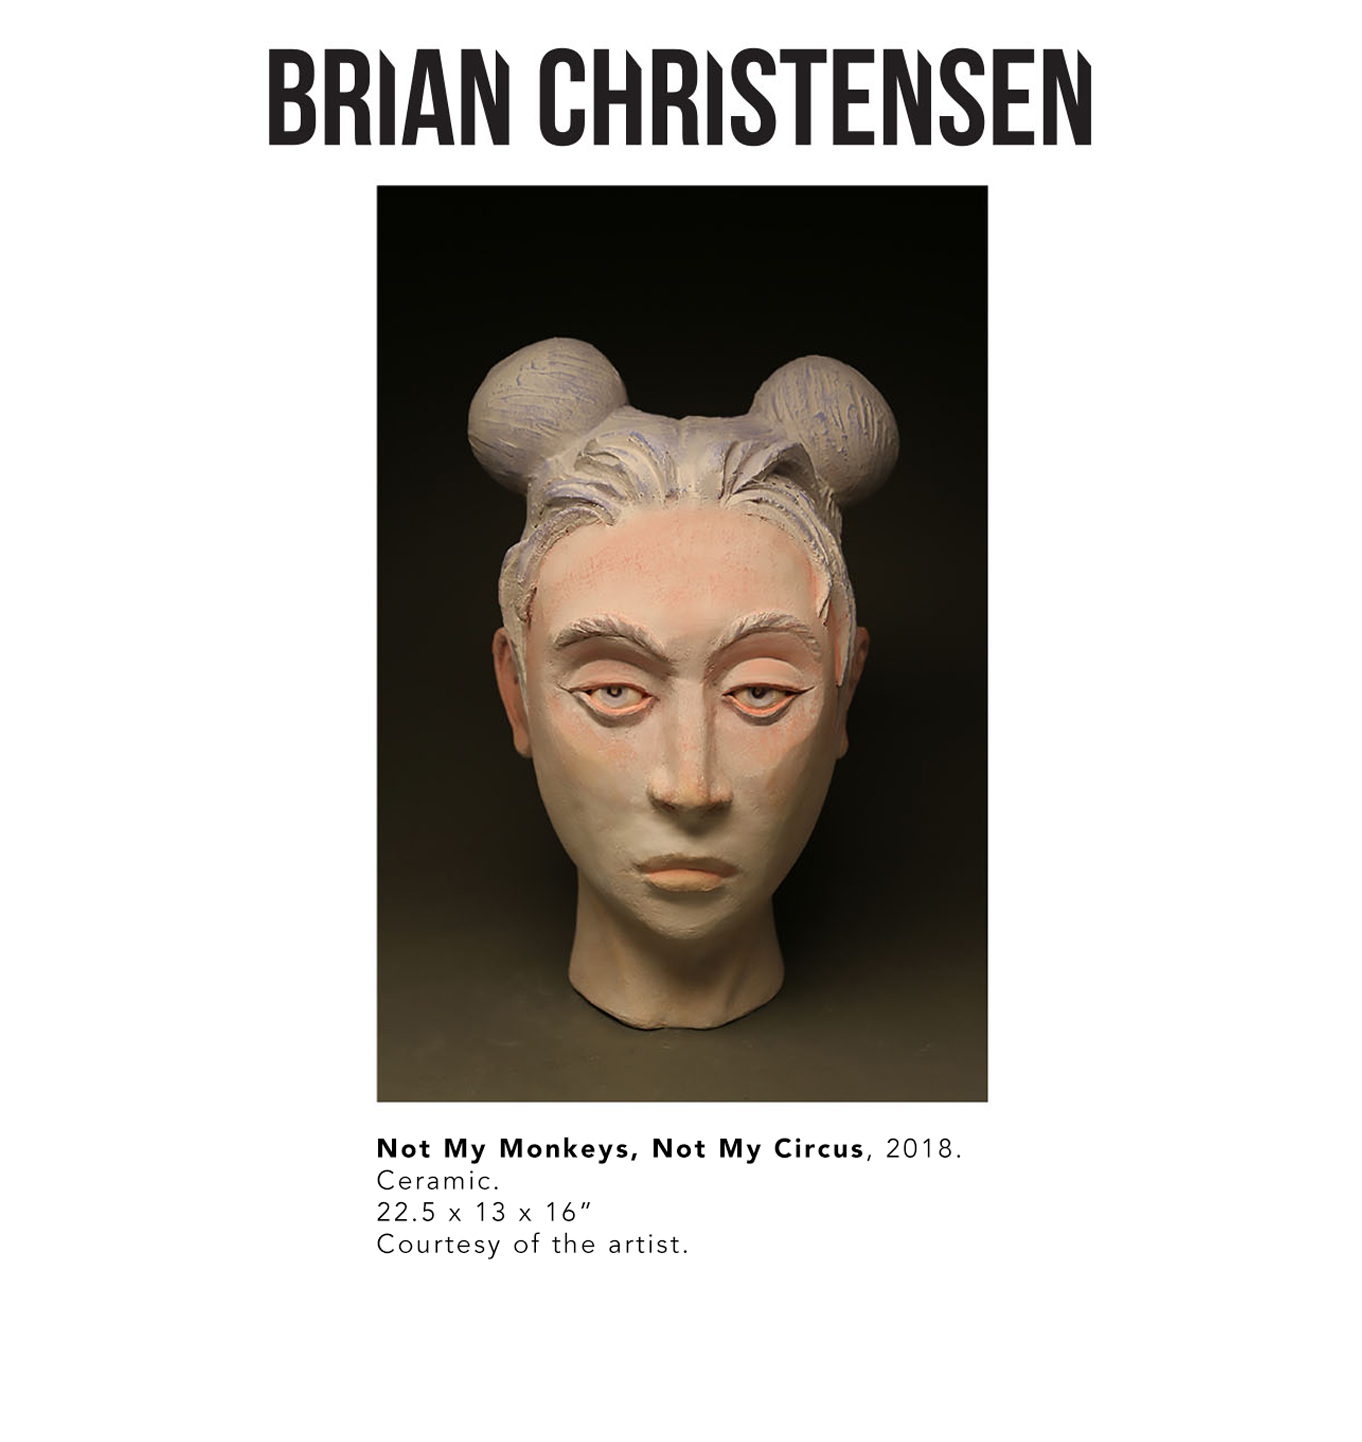 Brian Christensen, Not My Monkeys, Not My Circus, 2018. Ceramic. 22.5 x 13 x 16” Courtesy of the artist. A sculpture of the head of a woman with facial features painted.